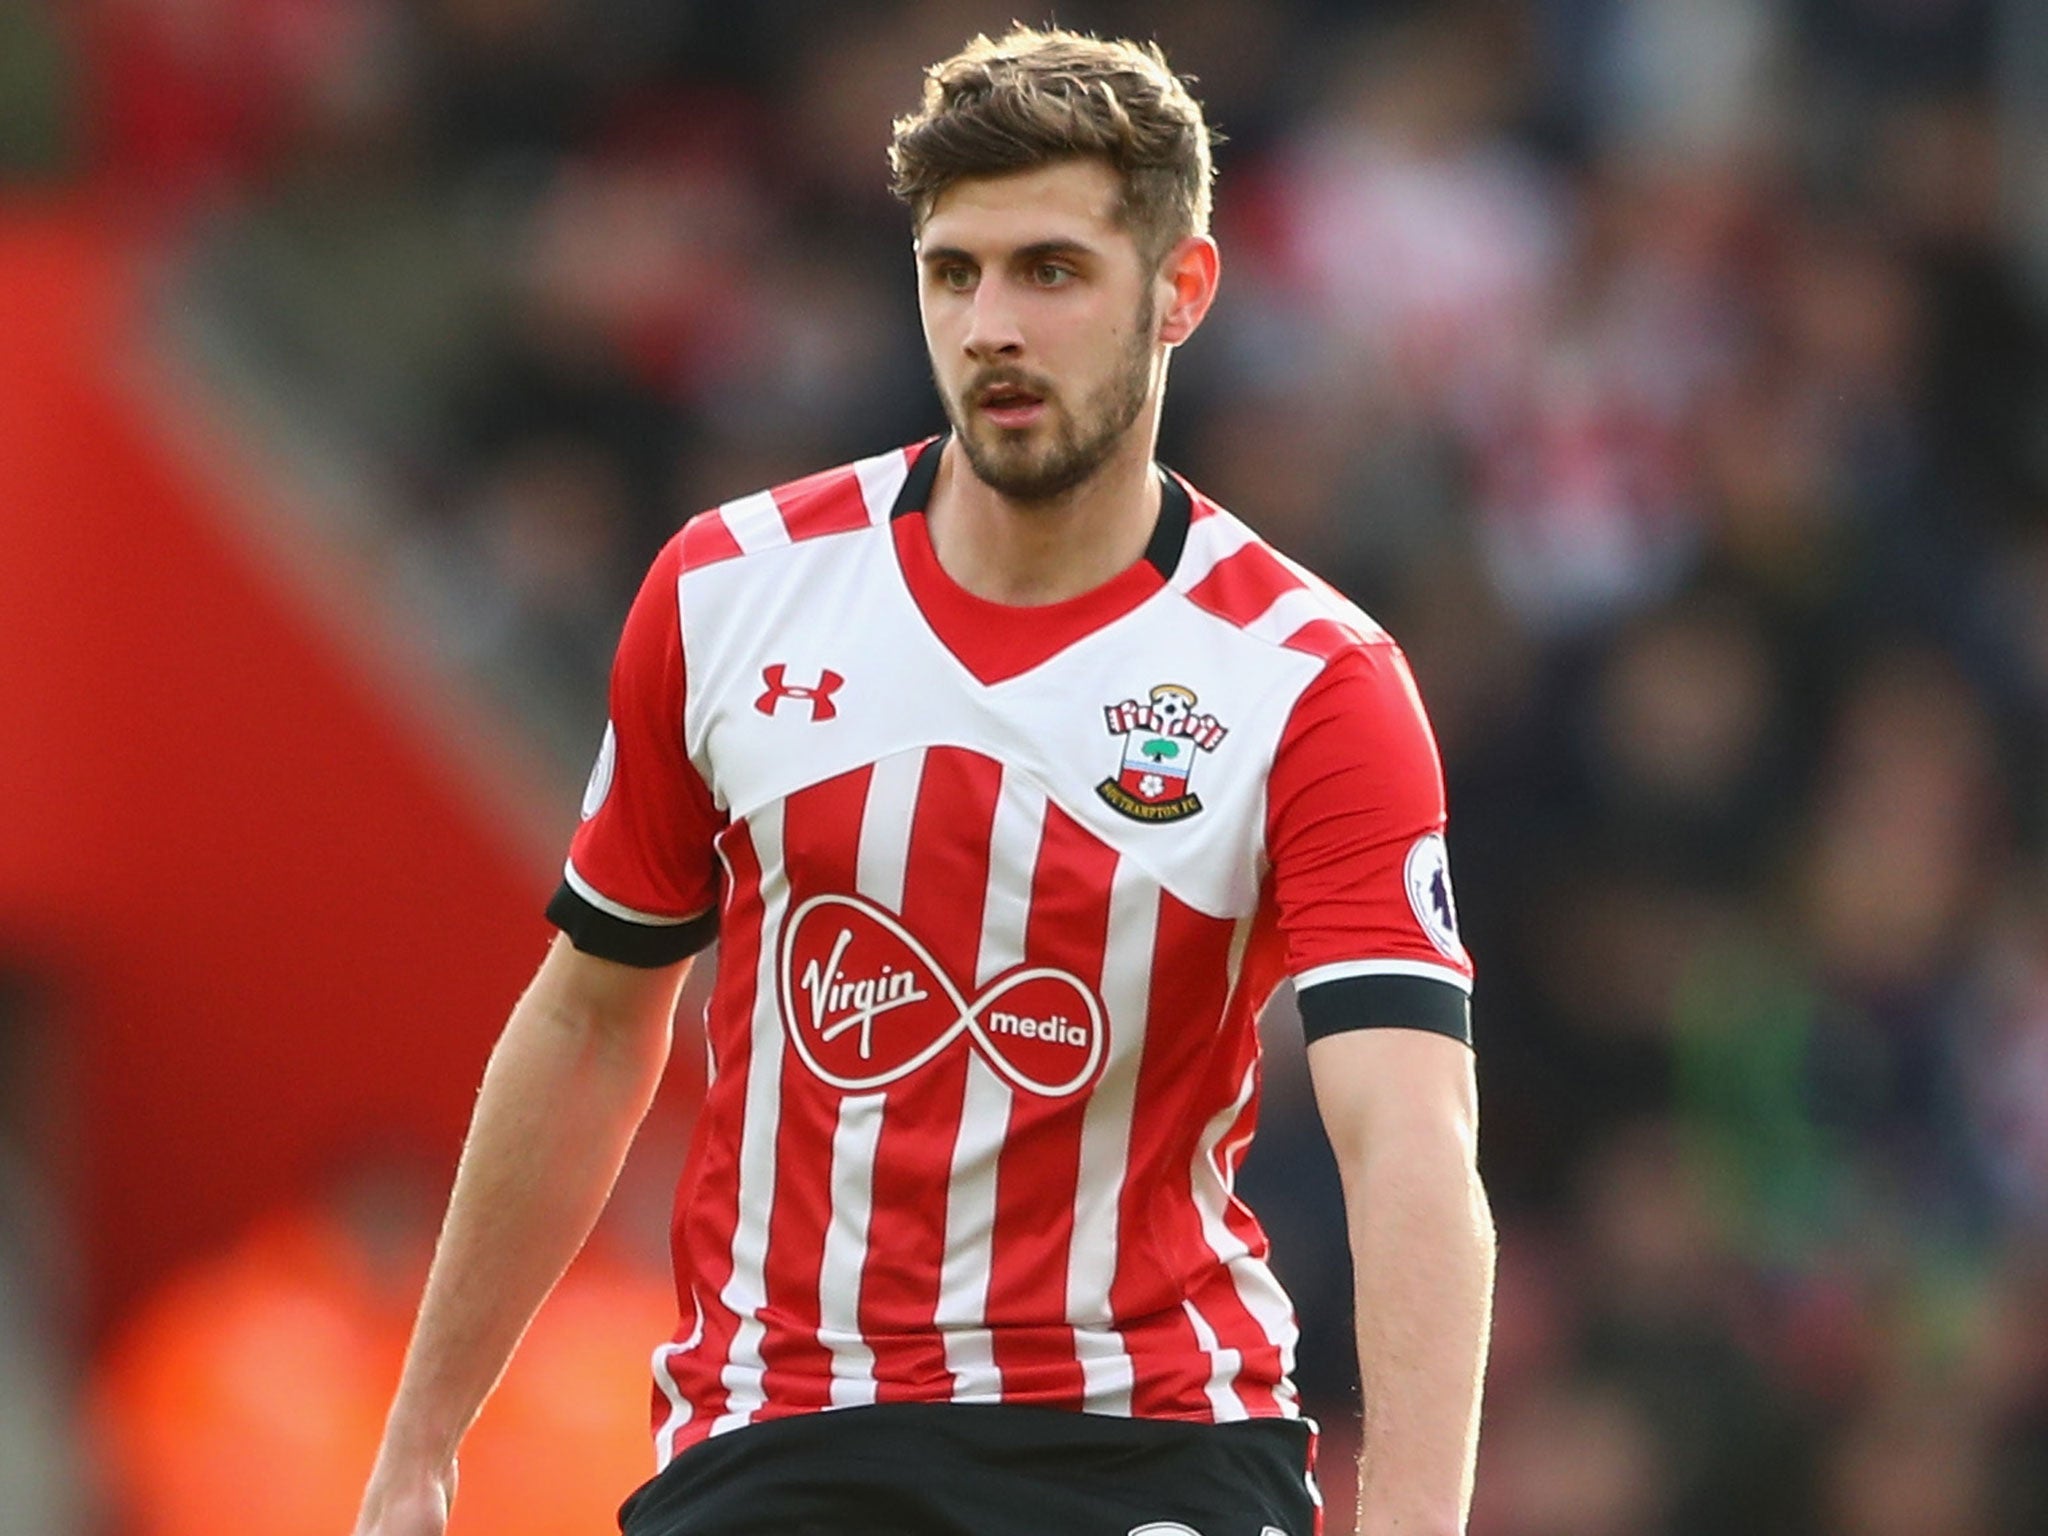 Jack Stephens could be tasked with shackling Zlatan Ibrahimovic in the EFL Cup final